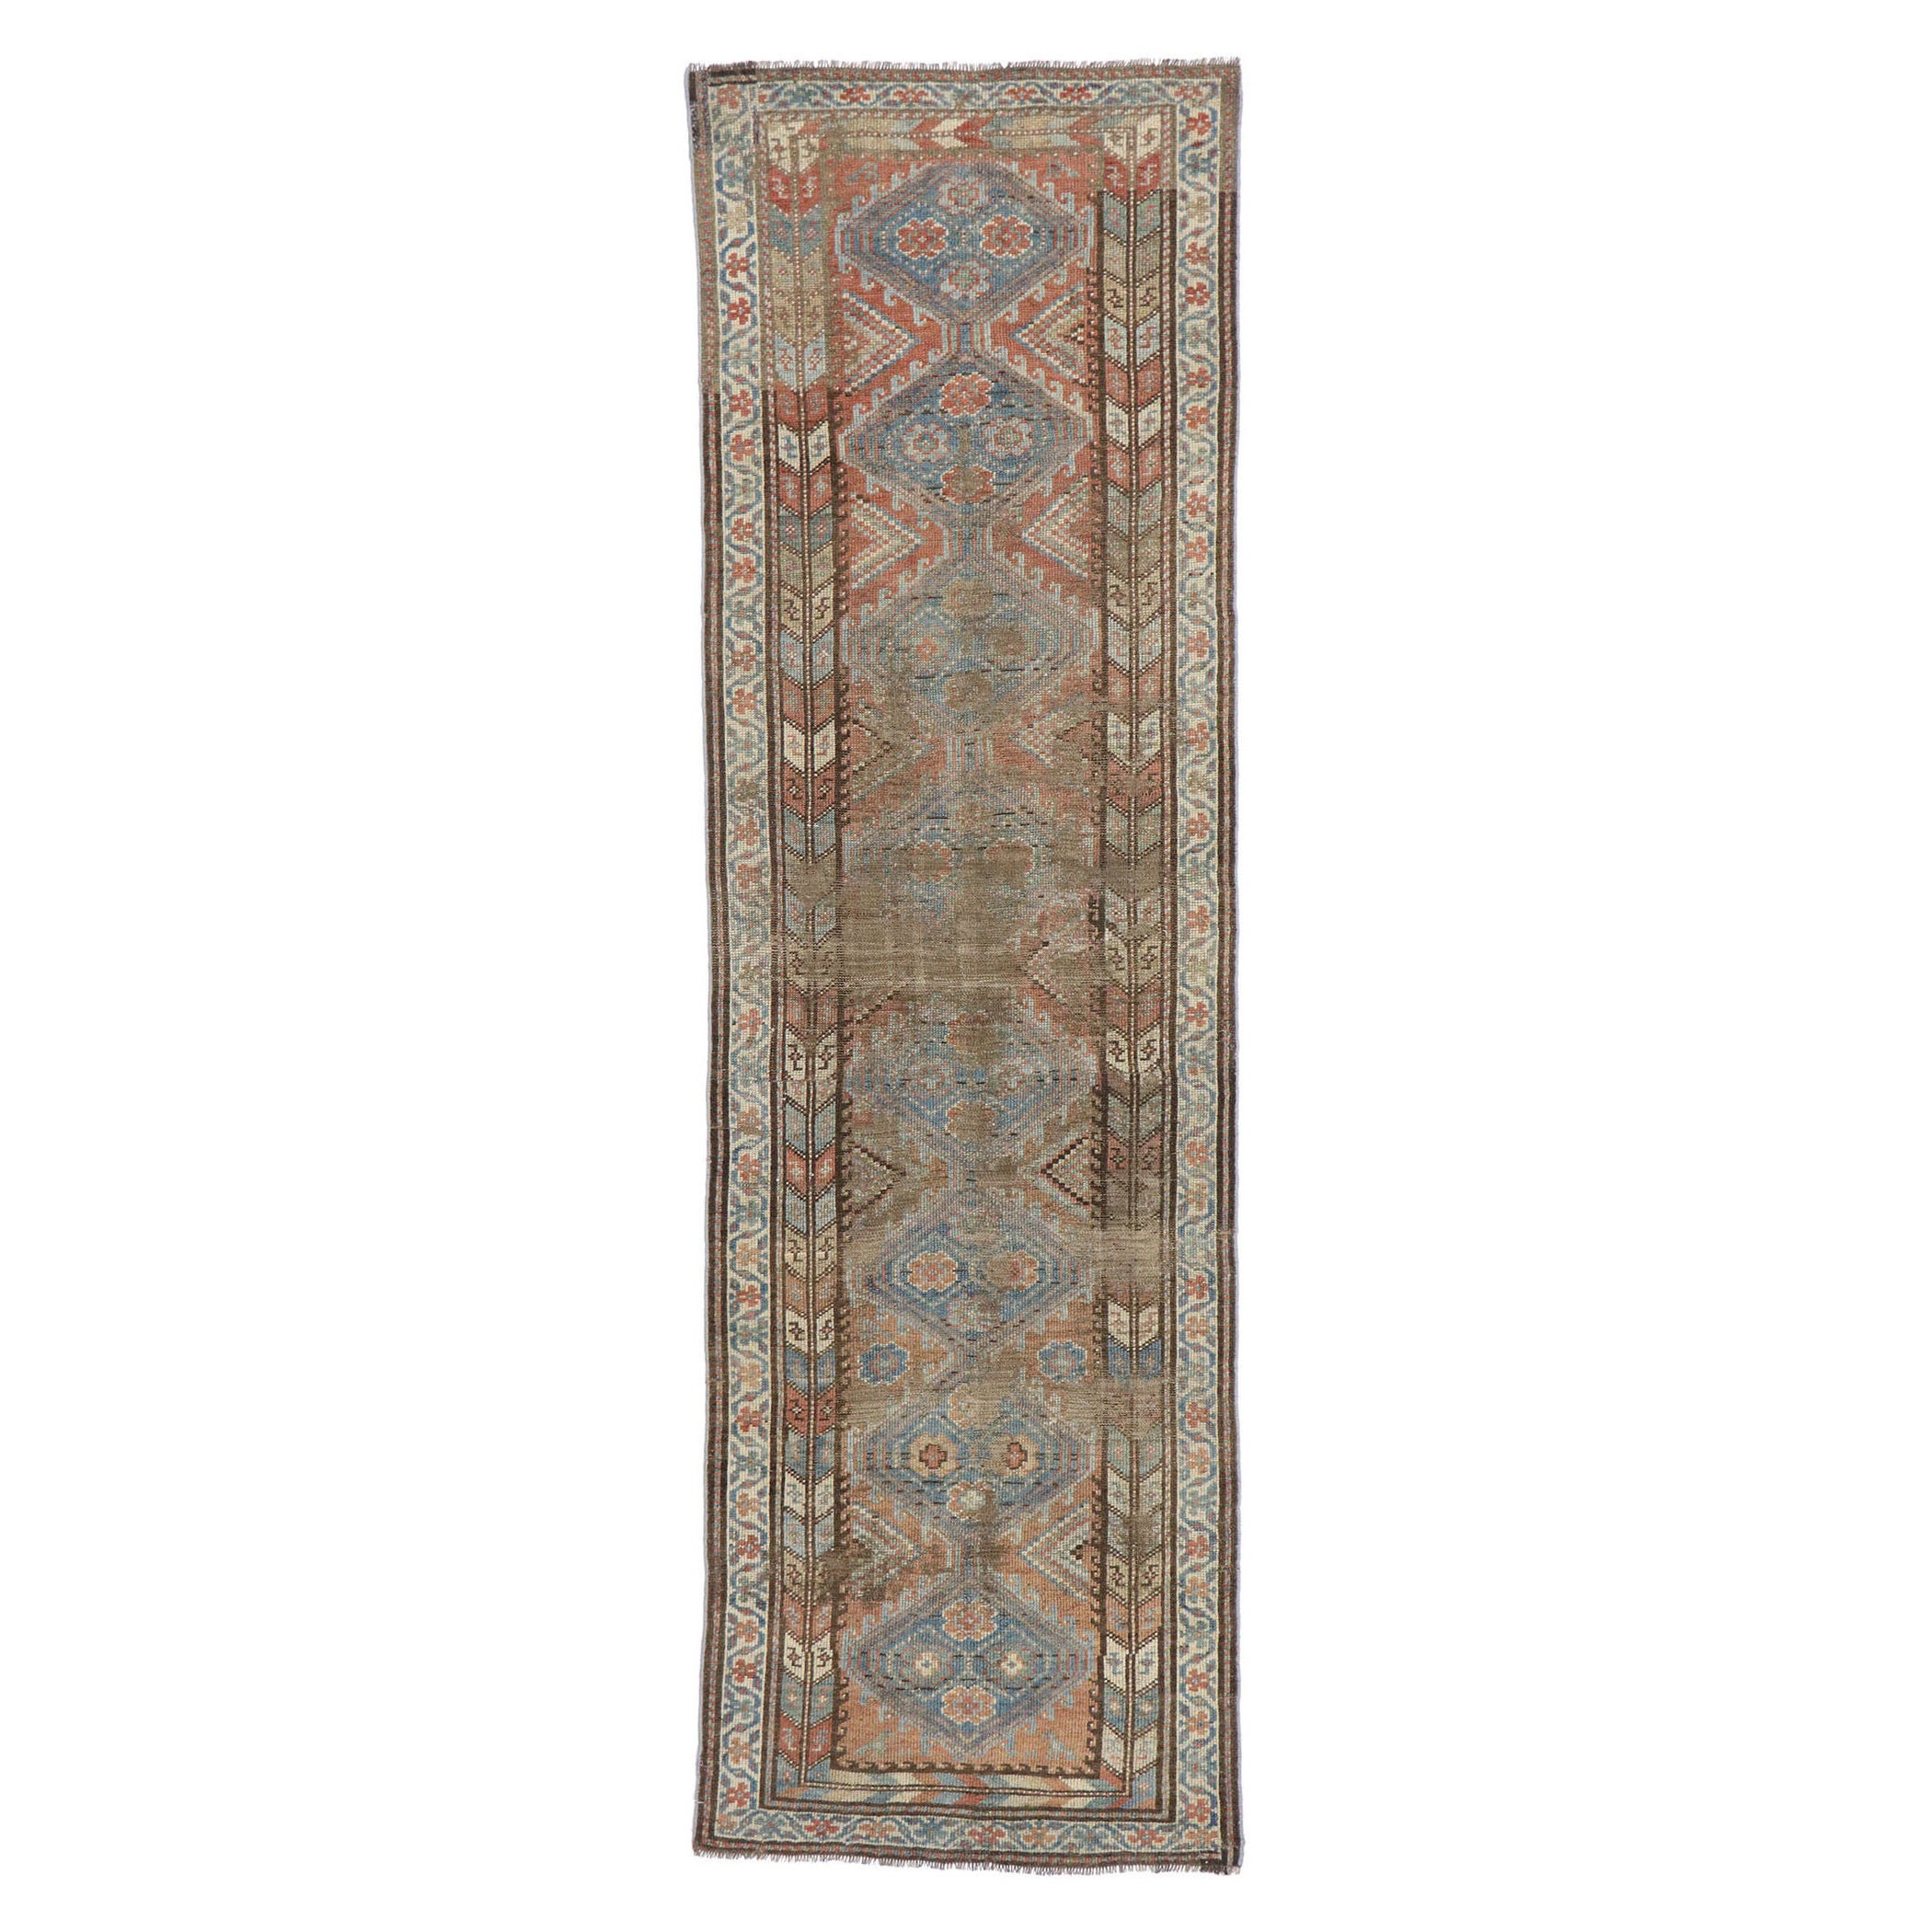 Antique Persian Shiraz Runner with Rustic Tribal Style